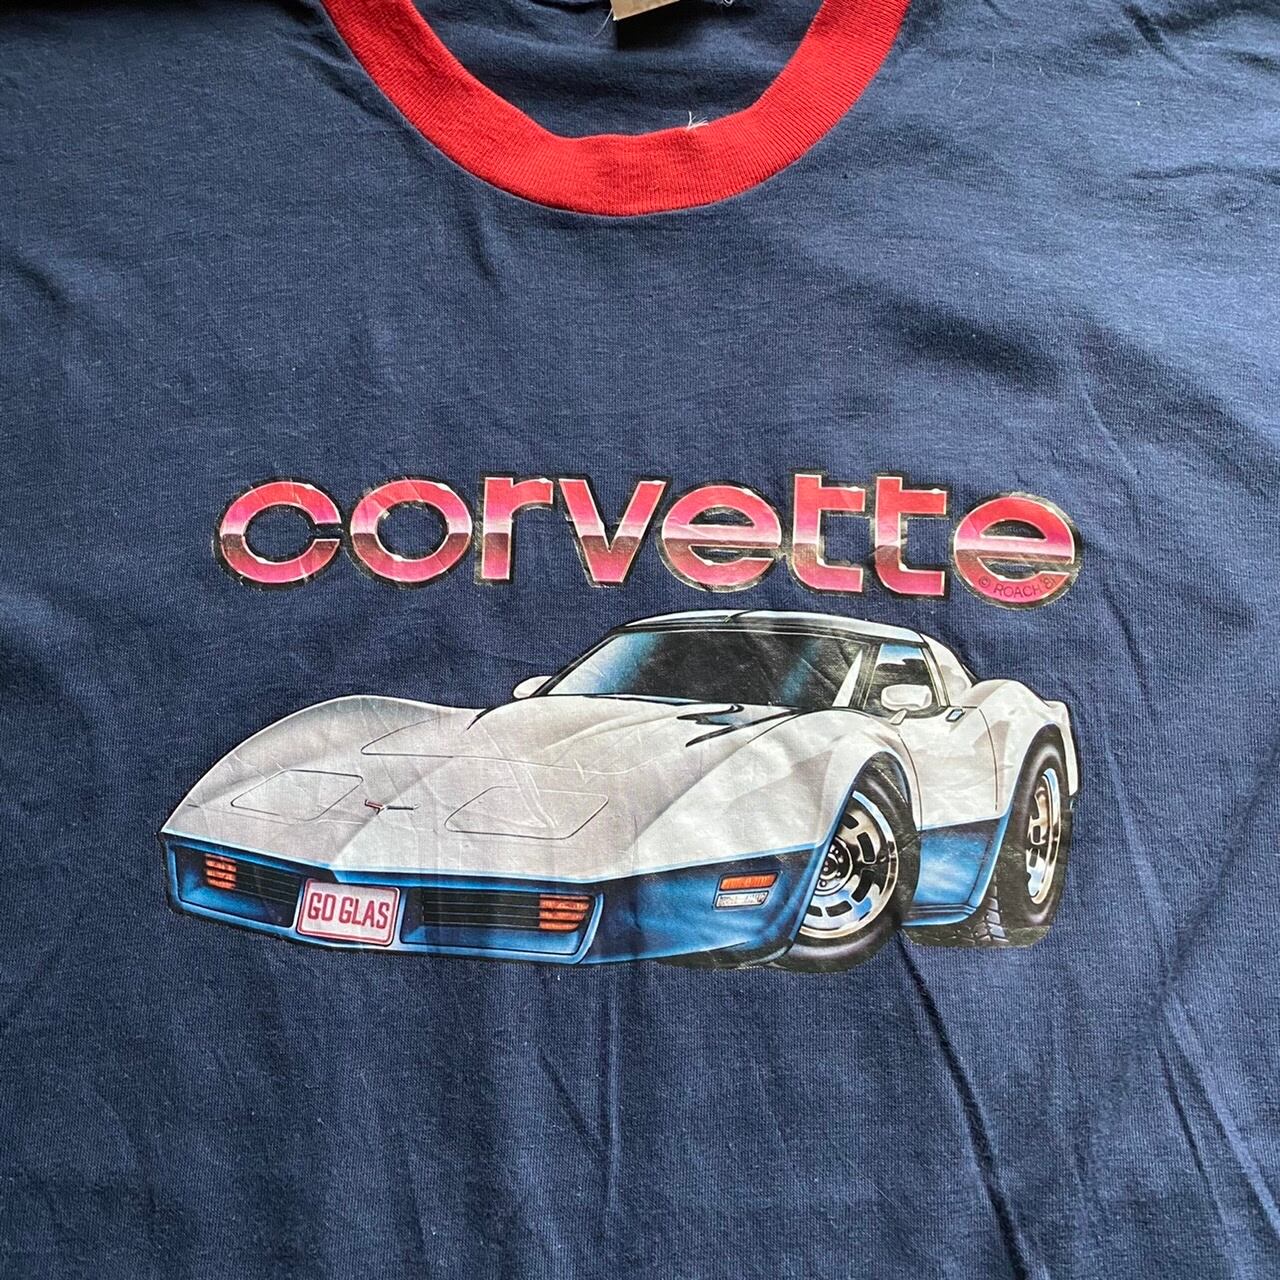 used vintage ヴィンテージ古着　80年代　コルベット　corvette Tシャツ | magazines webshop powered  by BASE